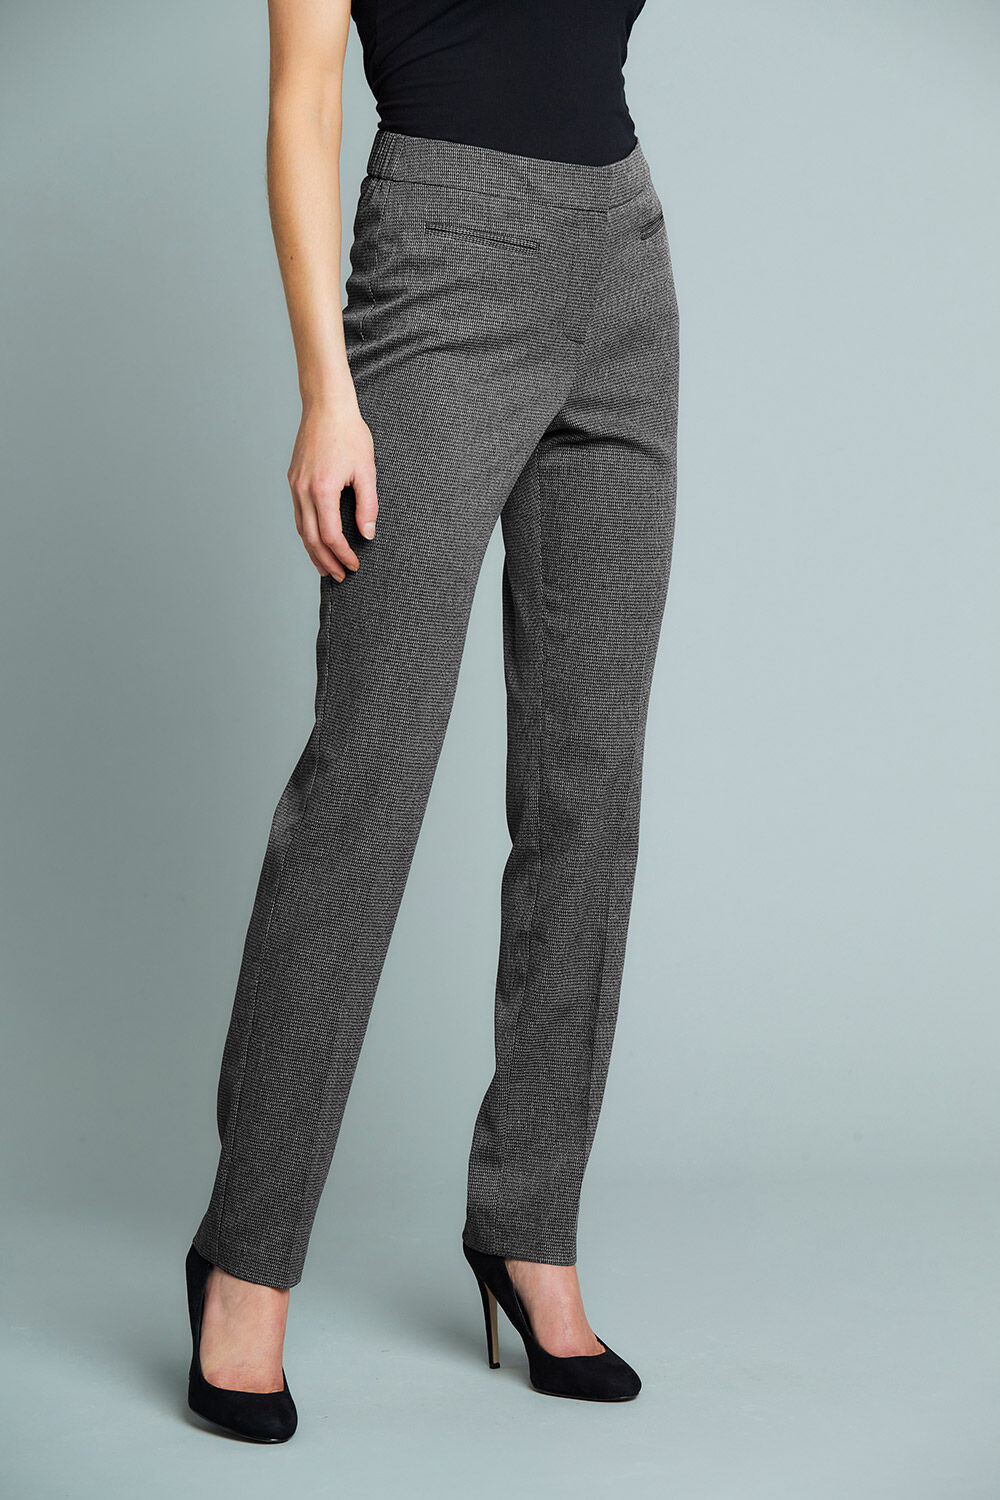 Up To 55% Off Women's Tapered Leg Cotton Trousers | Groupon